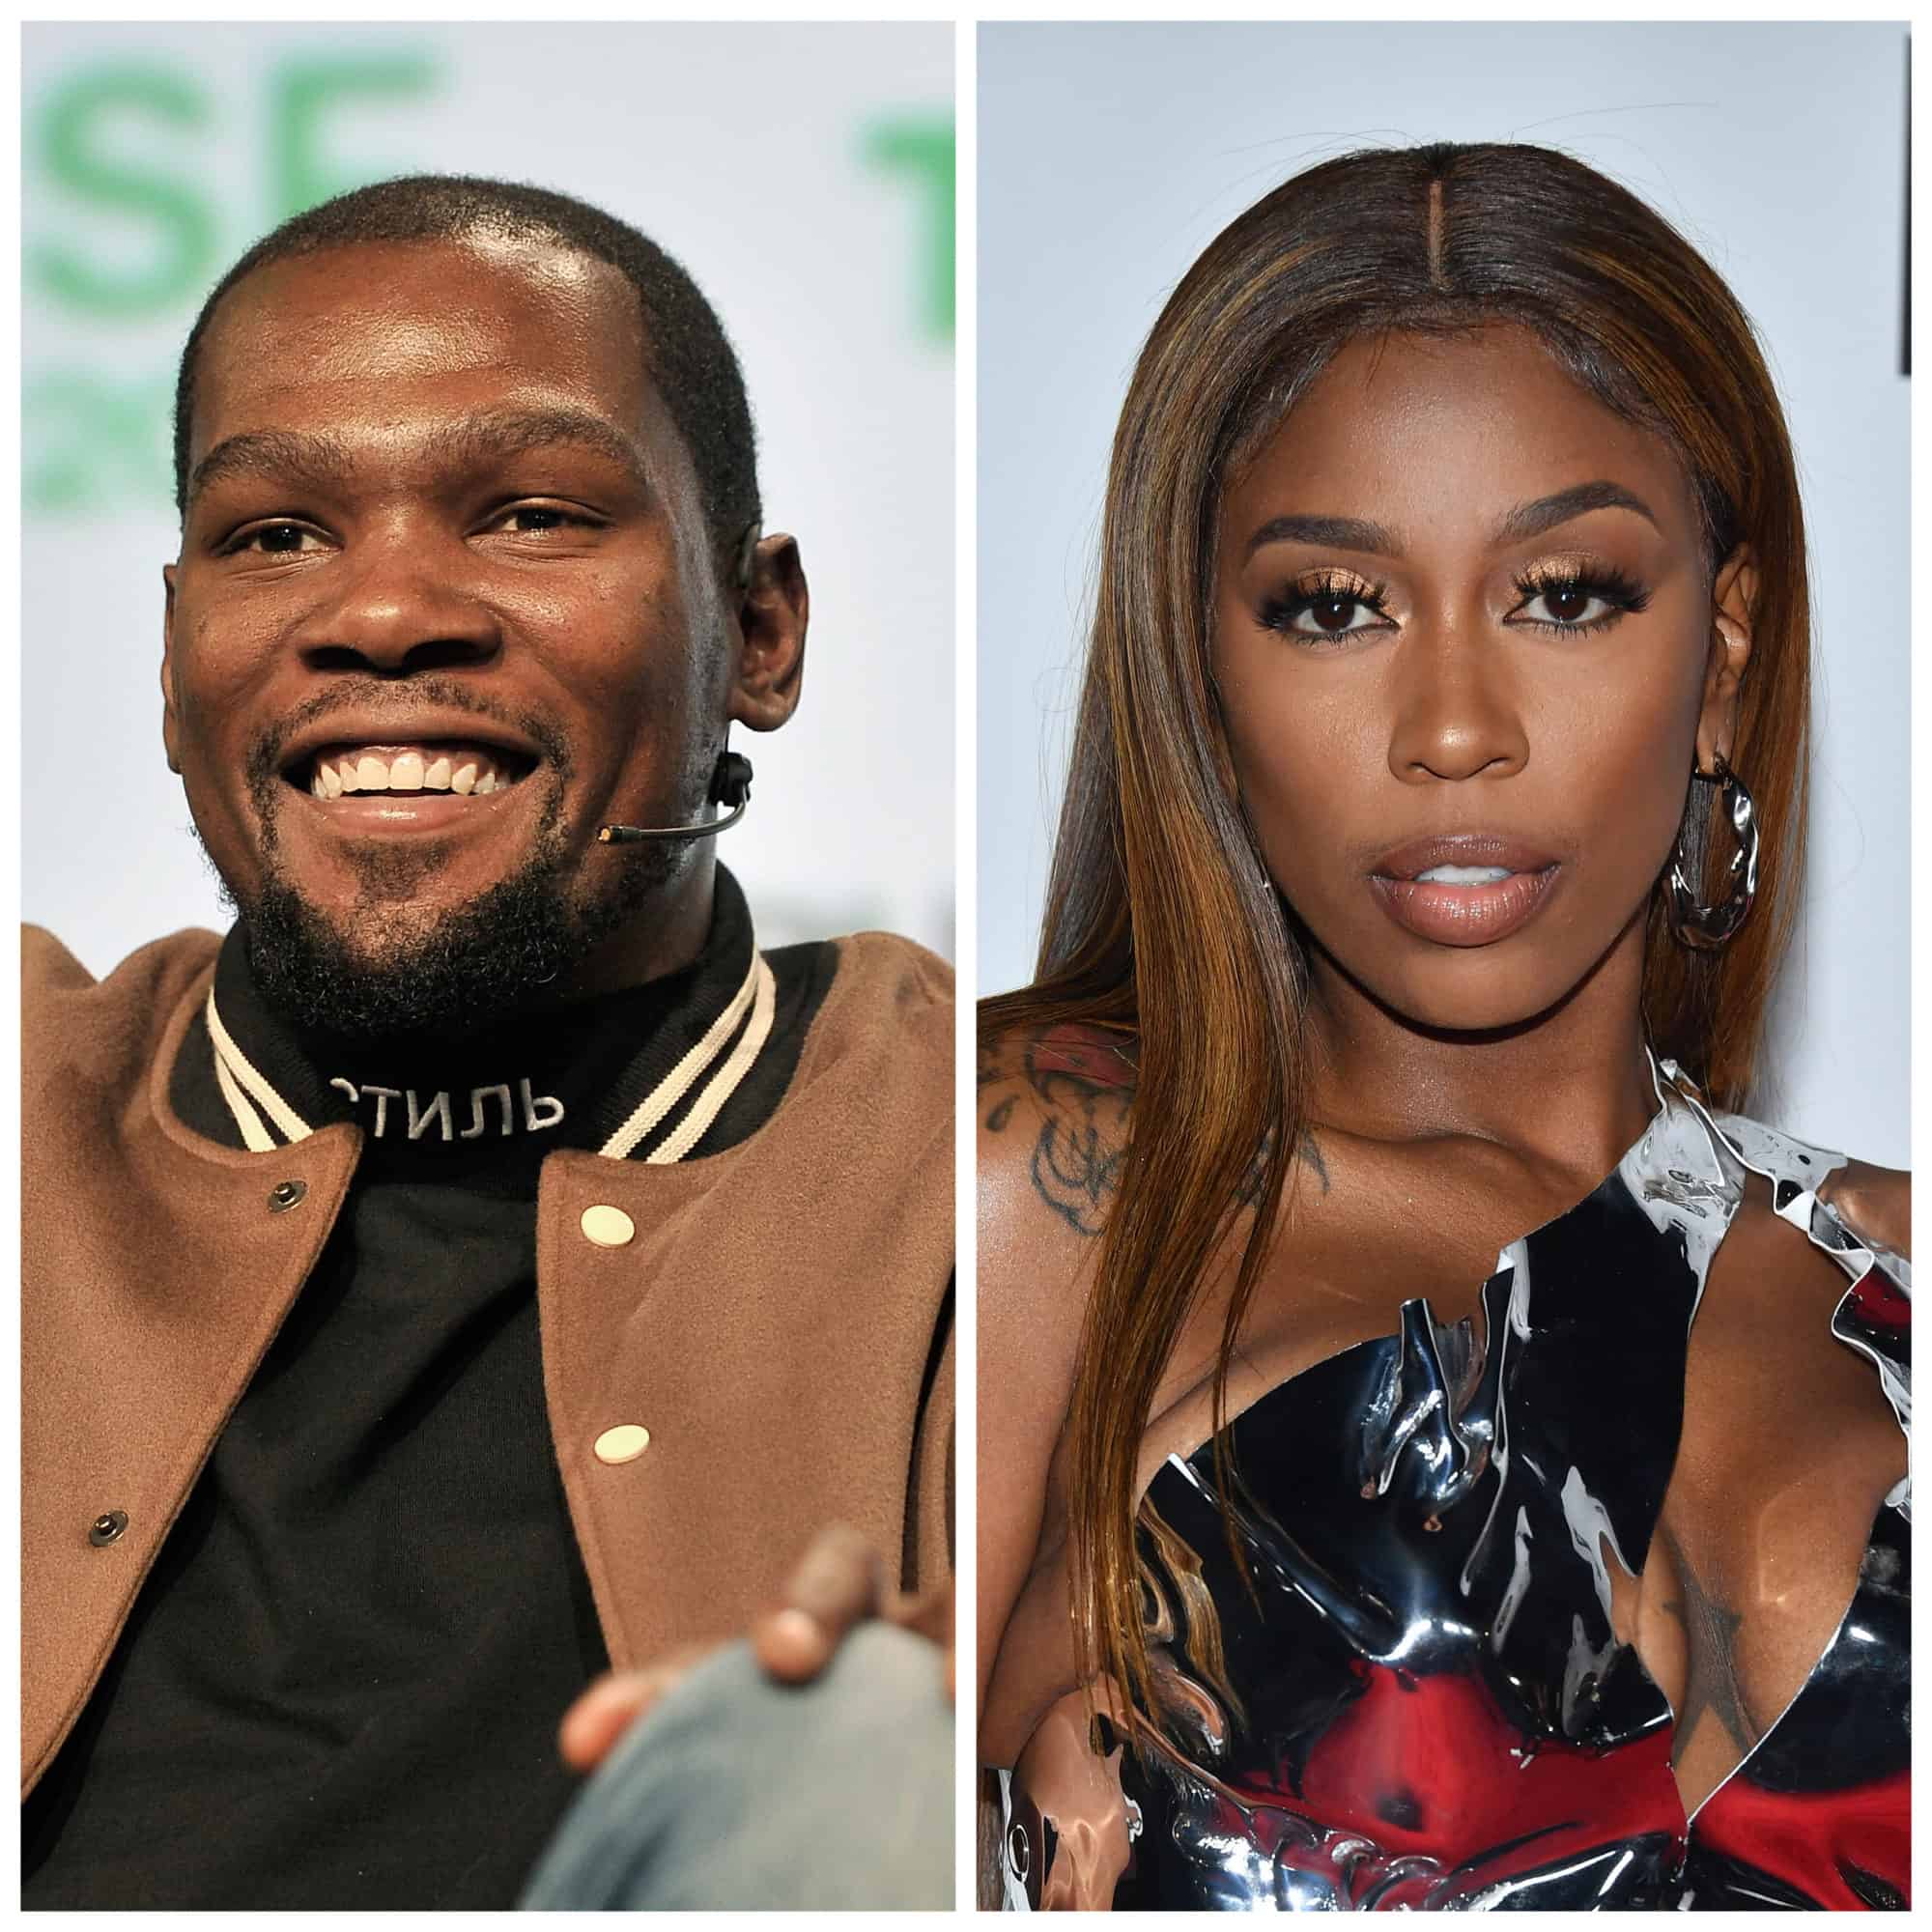 Kevin Durant Checks Kash Doll For Referring To Herself As ‘KD’ In Sexual Tweet